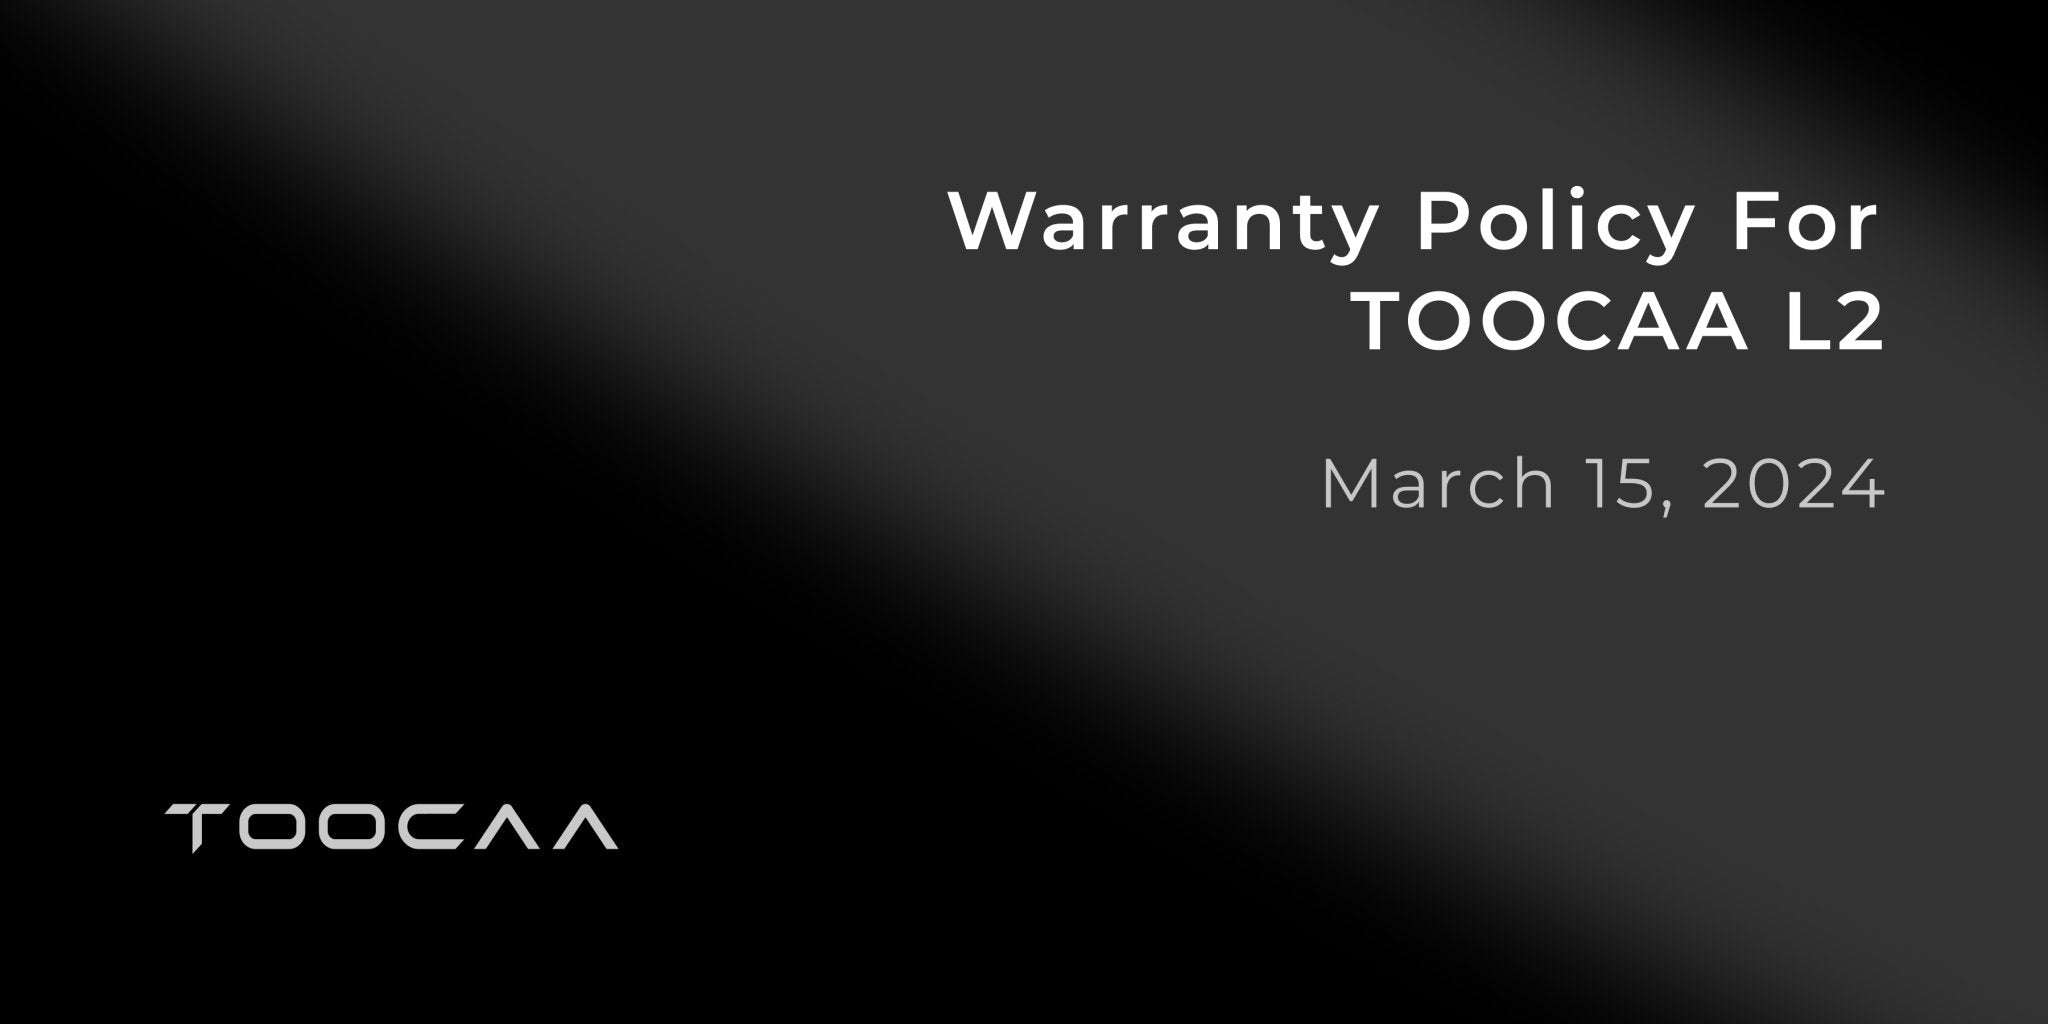 Warranty Policy For TOOCAA L2